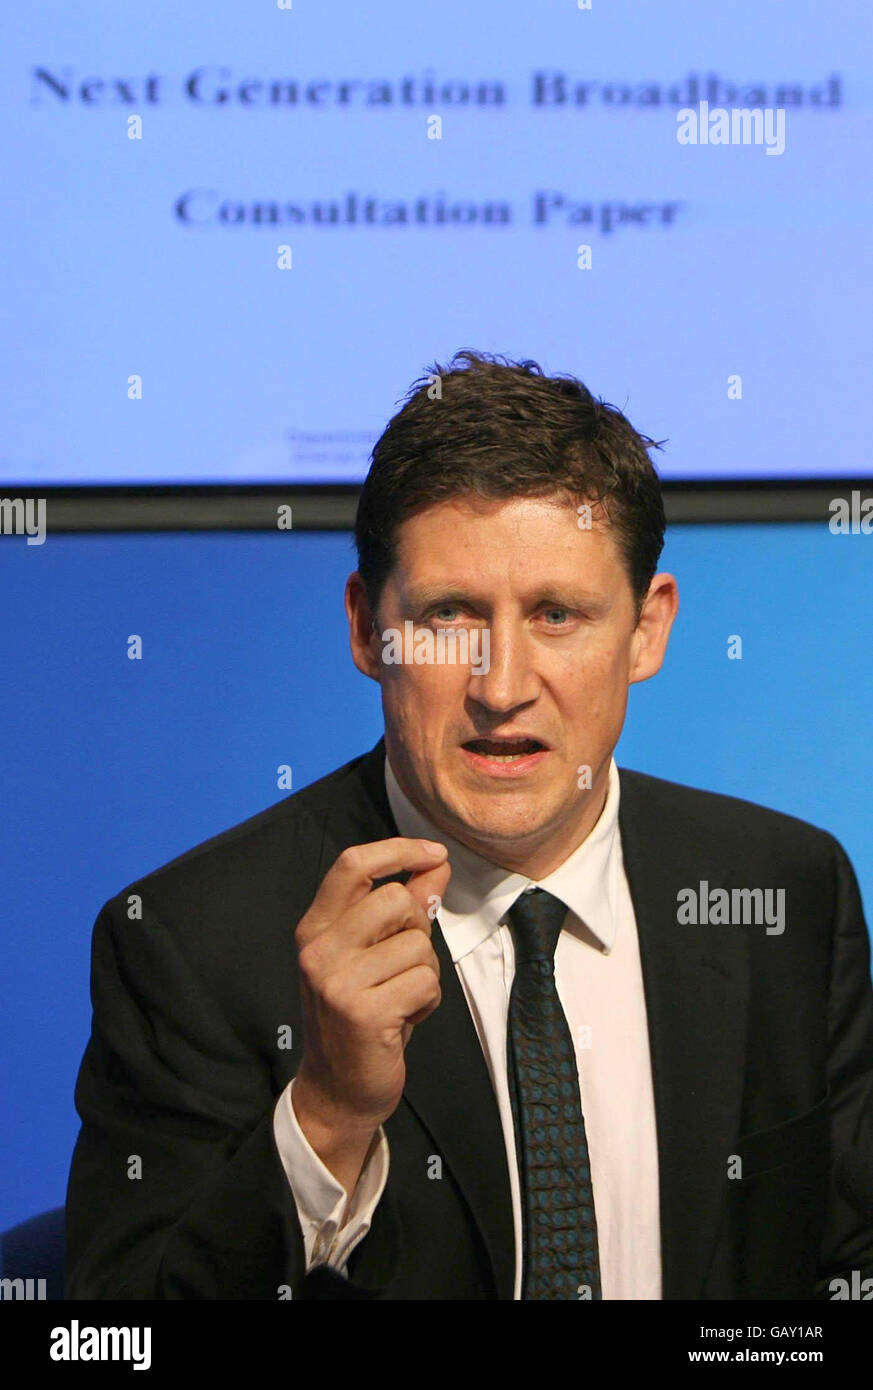 Eamon Ryan, Minister for Communications, Energy and Natural Resources, launches a public consultation paper on Next Generation Broadband at the Government Press Centre in Dublin. Stock Photo